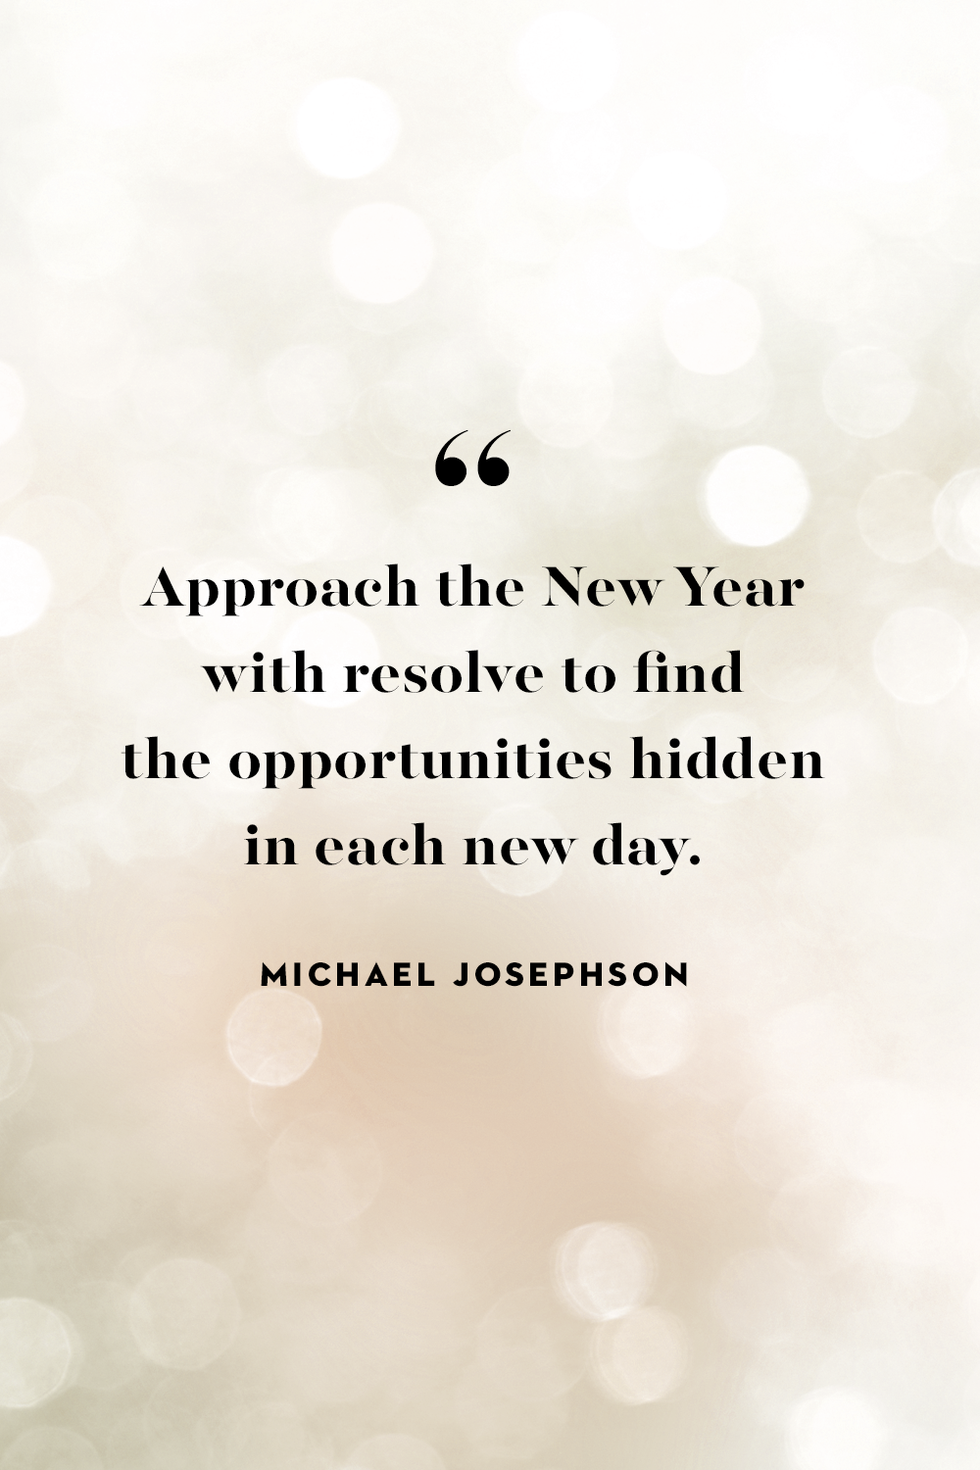 new year quote by michael josephson